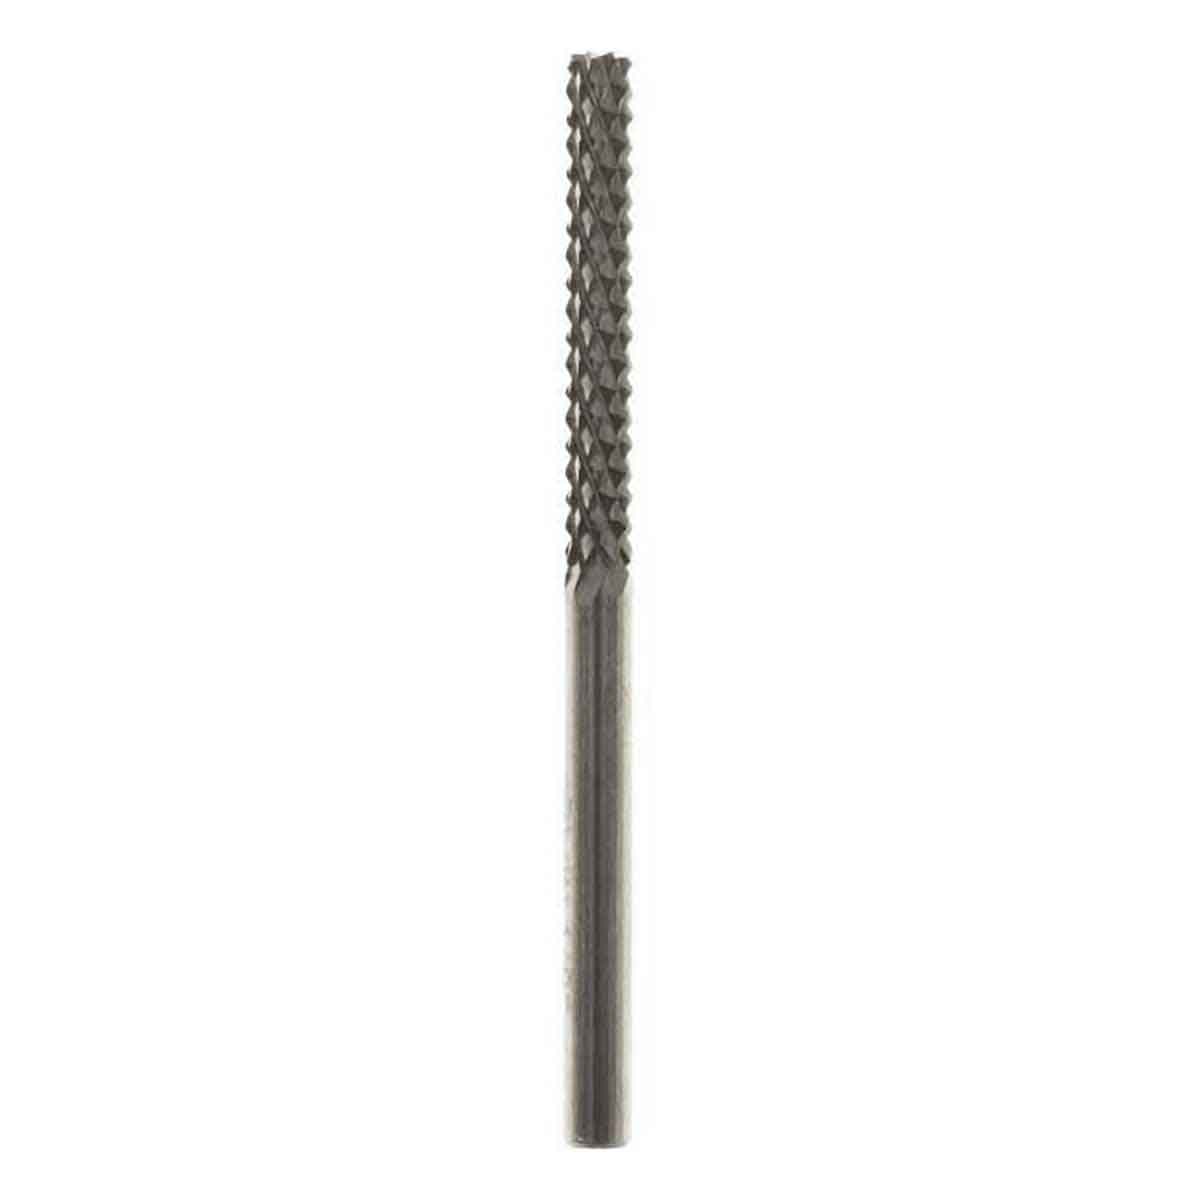 Compare to Rotozip RZ125 Carbide Tile Cutting Bit